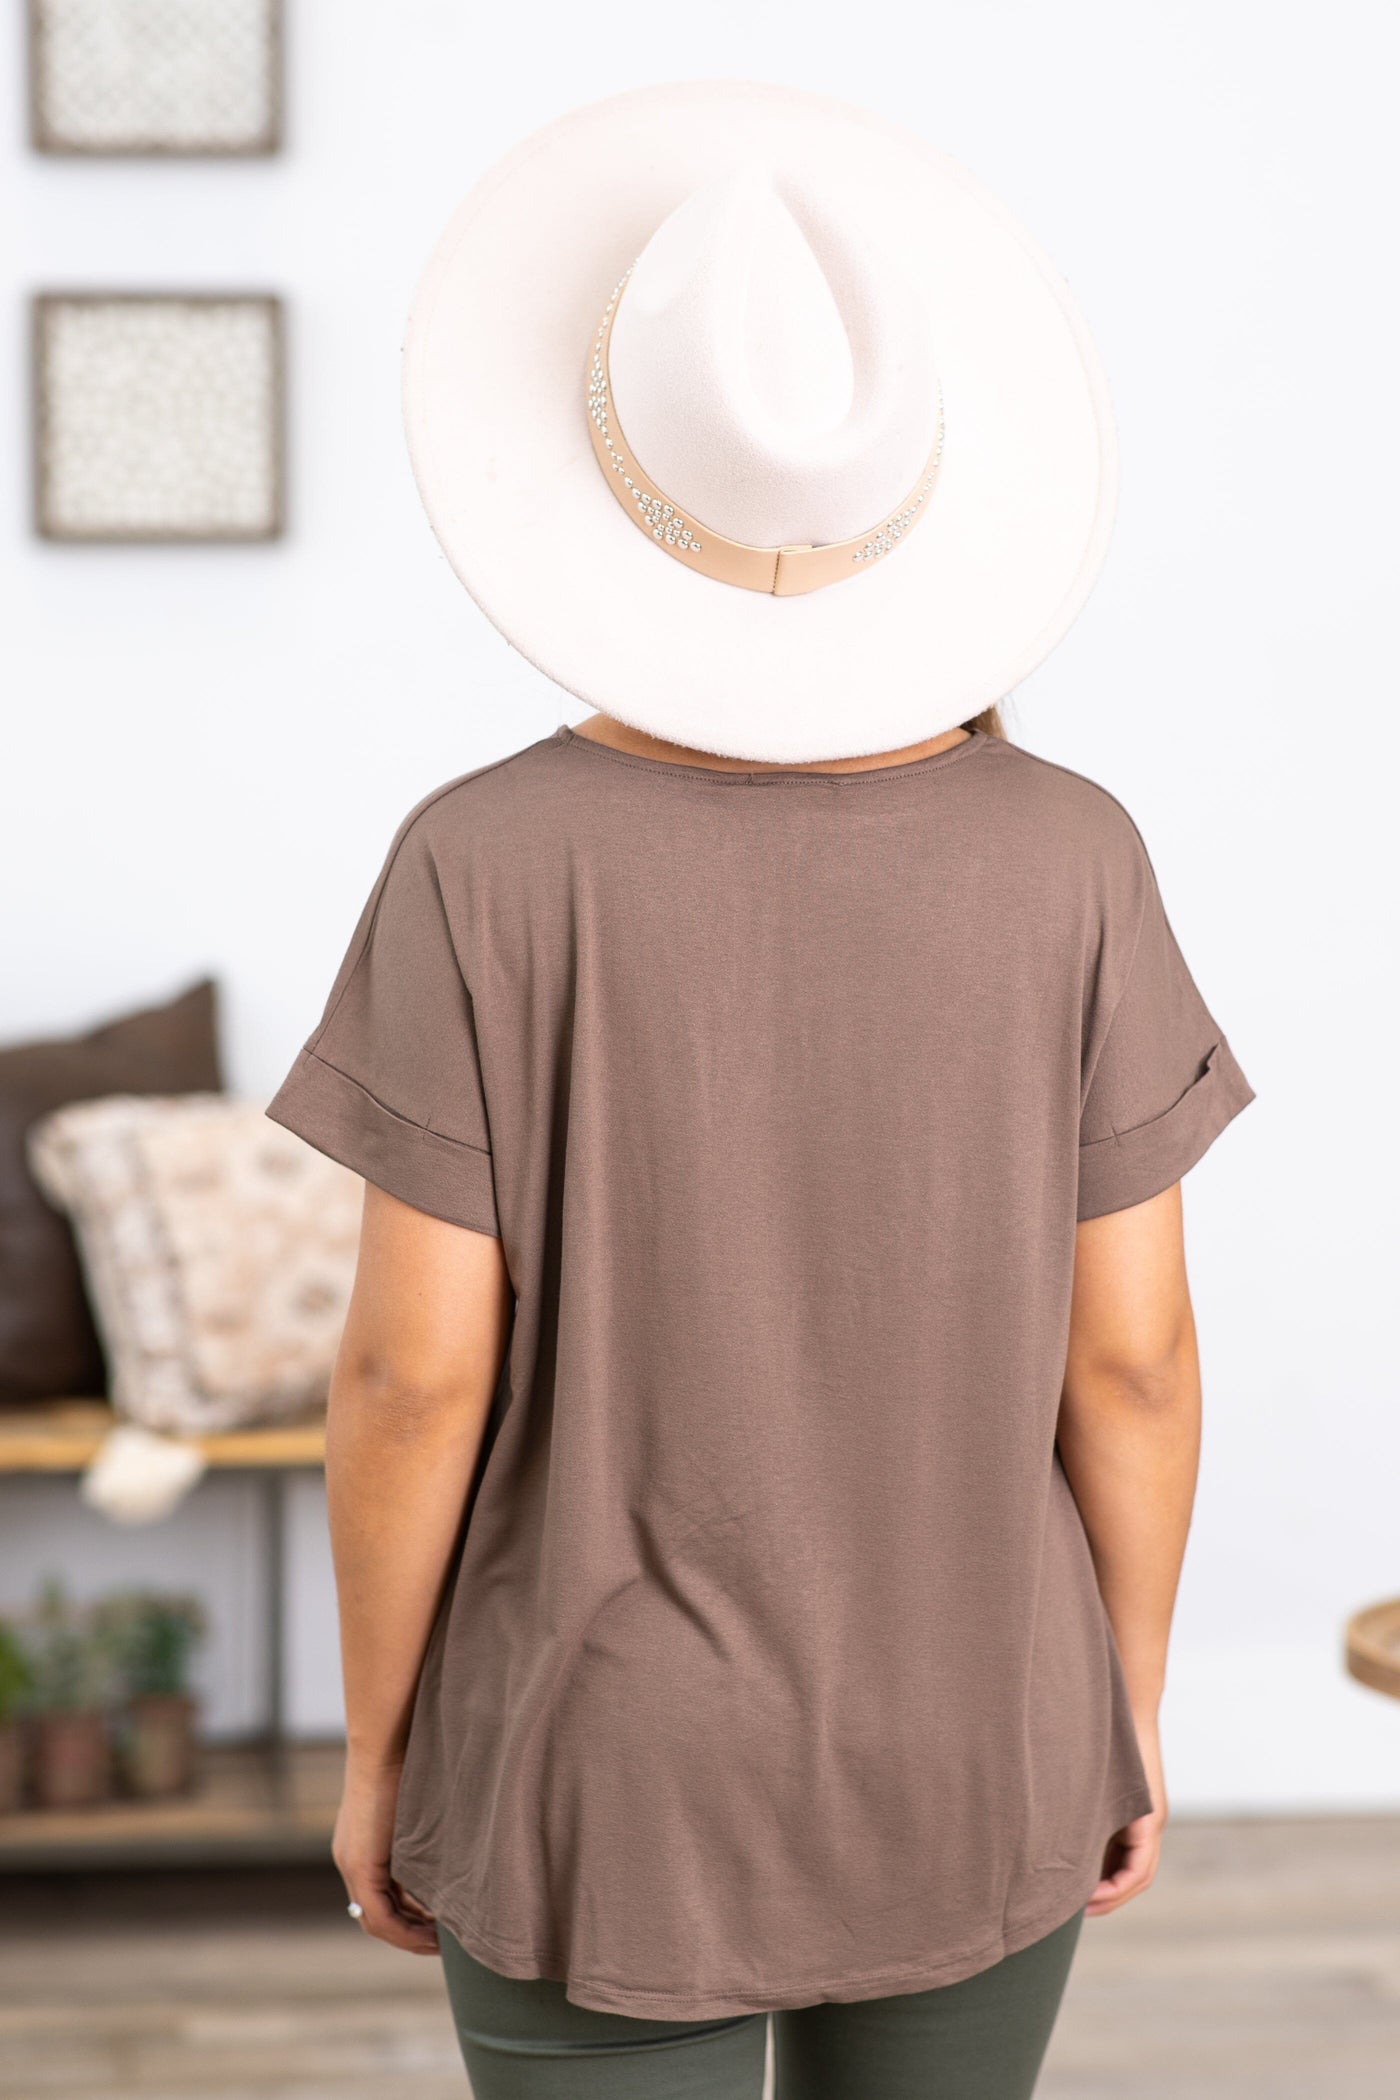 Mocha Knot Front Short Sleeve Top - Filly Flair